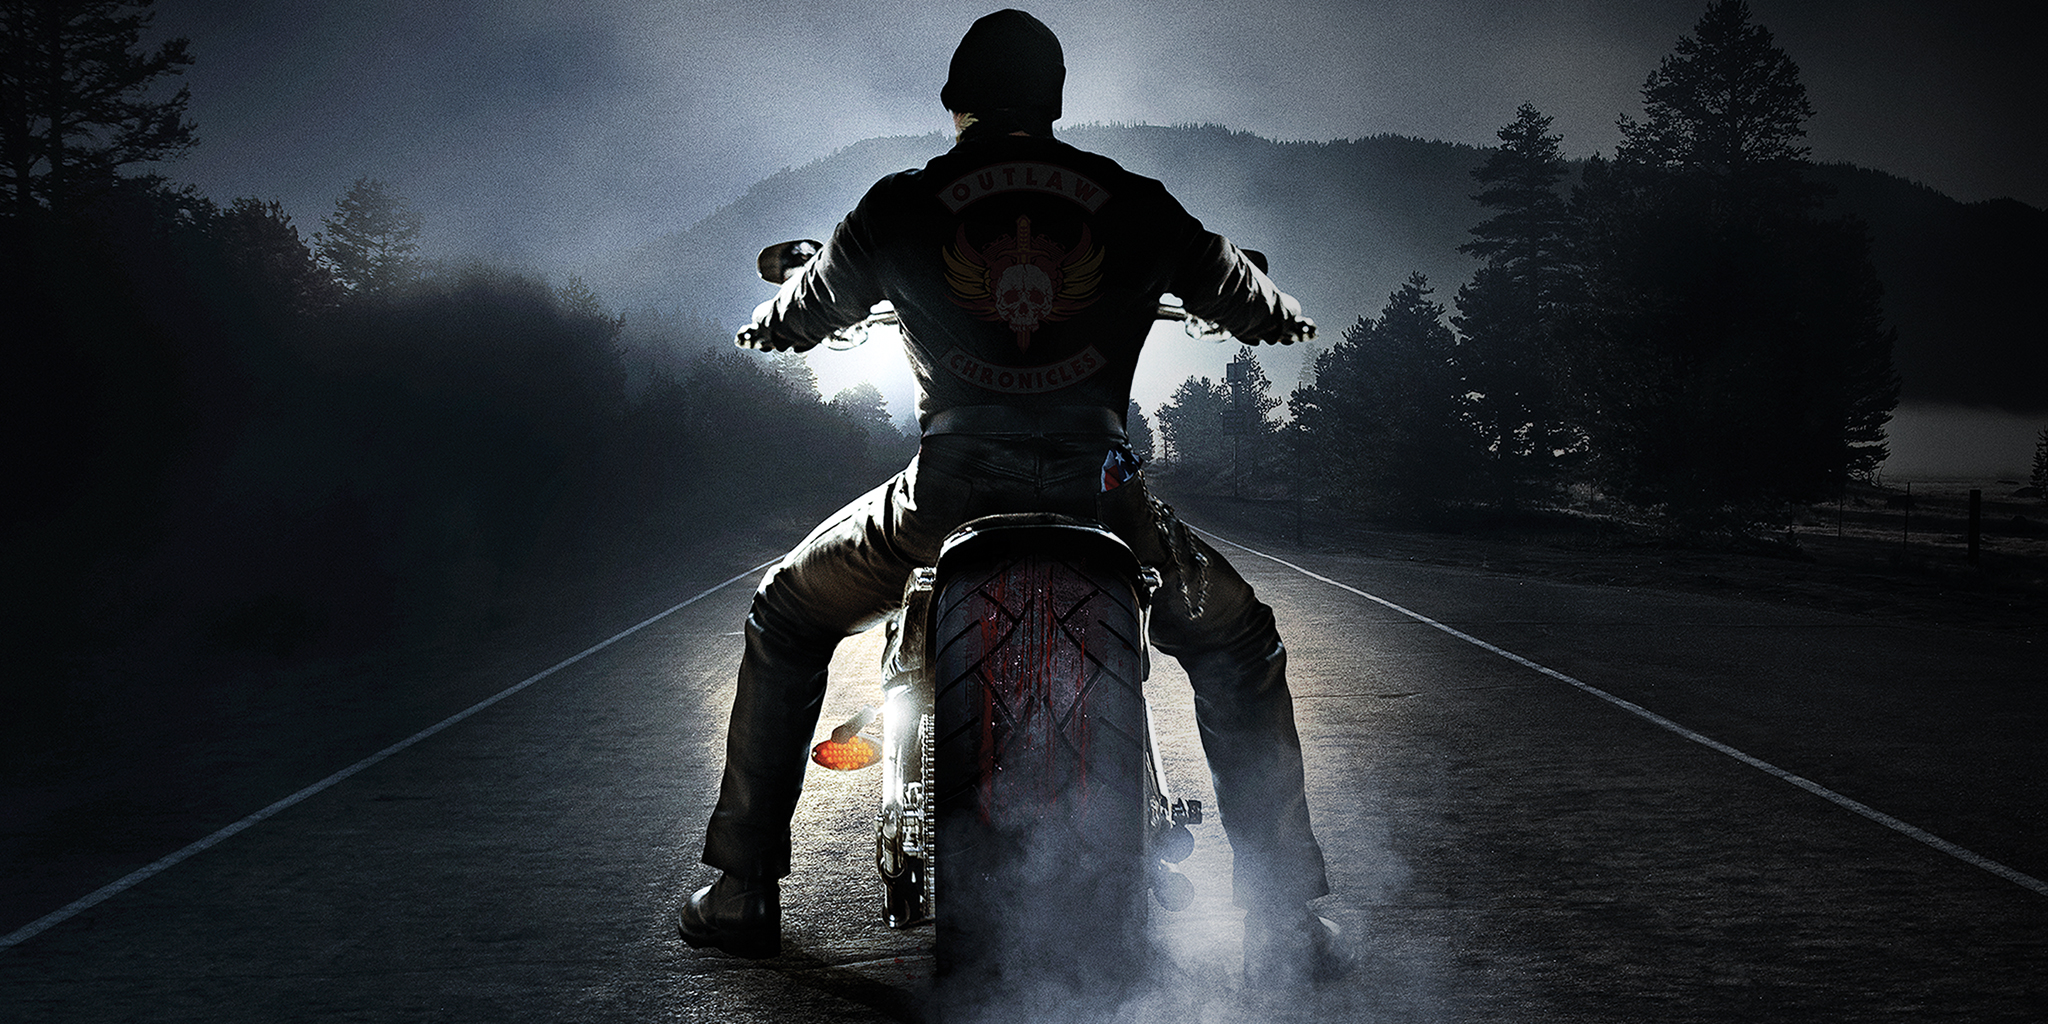 Outlaw Chronicles: Hells Angels